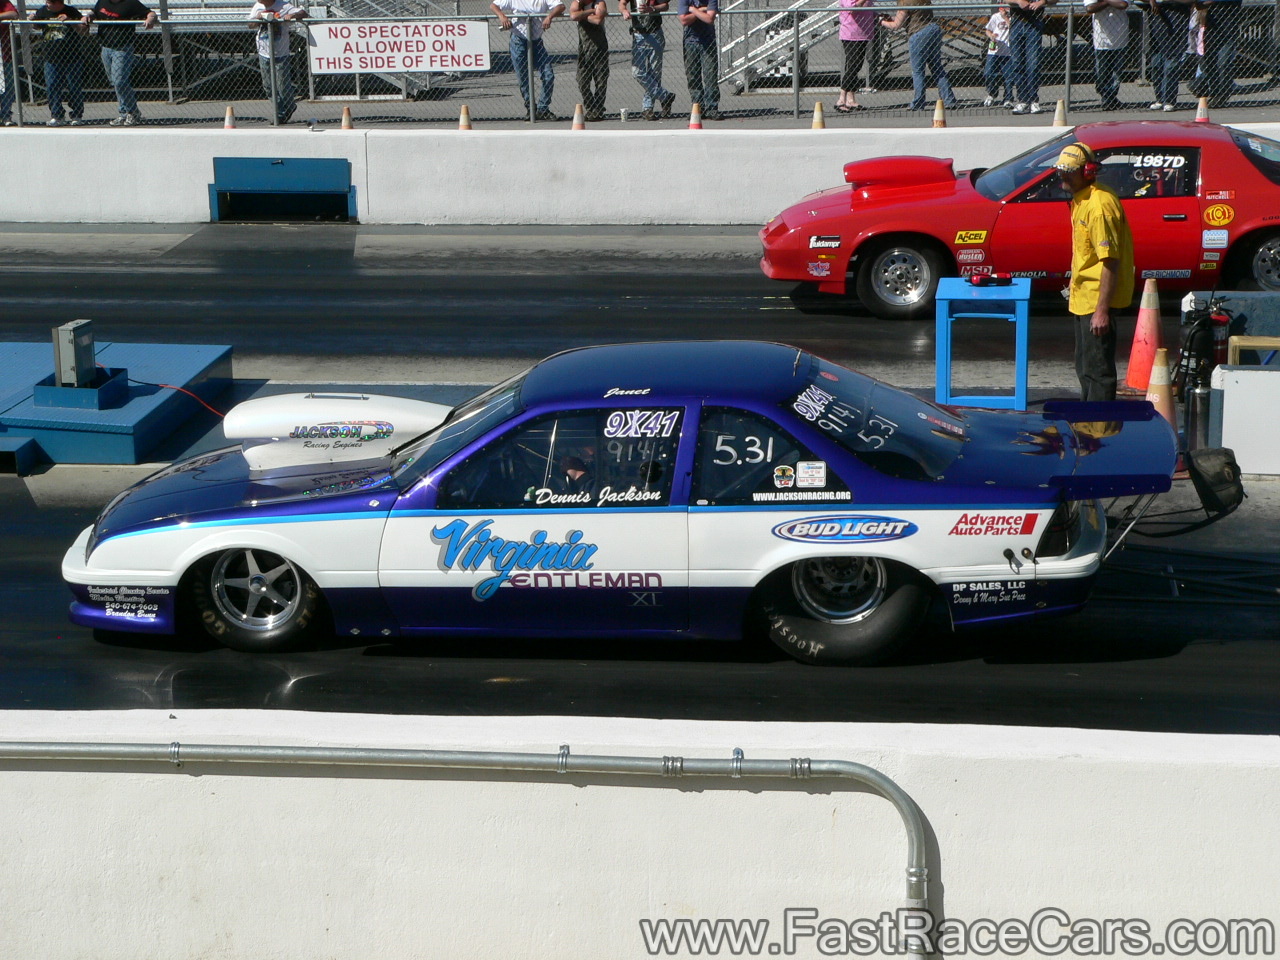 Chevy Drag Race Car Fastracecars Categories Pictures